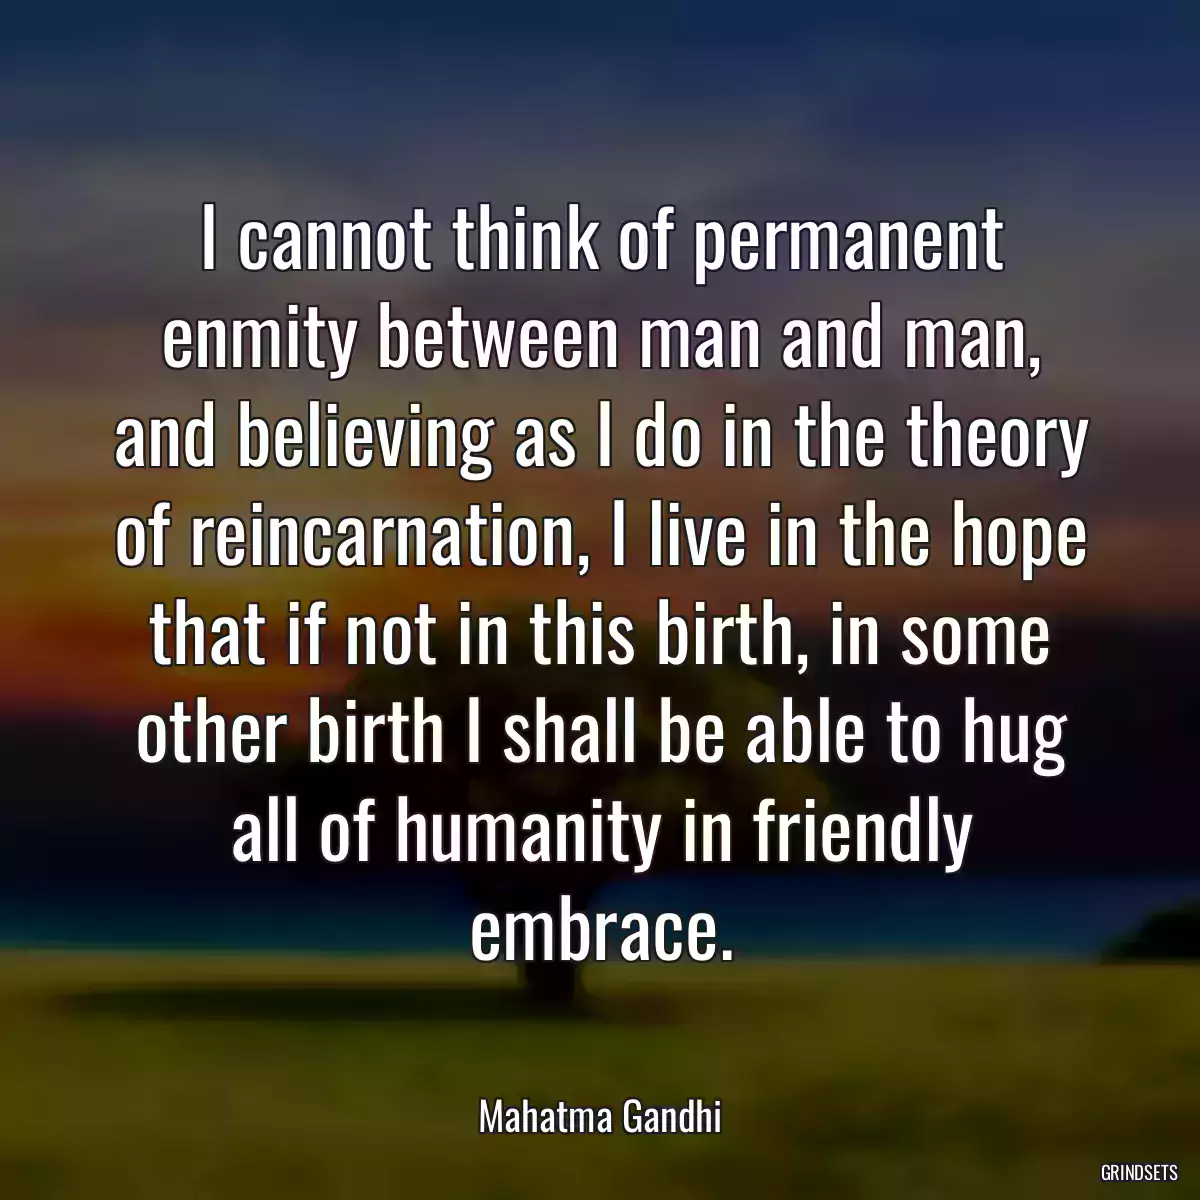 I cannot think of permanent enmity between man and man, and believing as I do in the theory of reincarnation, I live in the hope that if not in this birth, in some other birth I shall be able to hug all of humanity in friendly embrace.